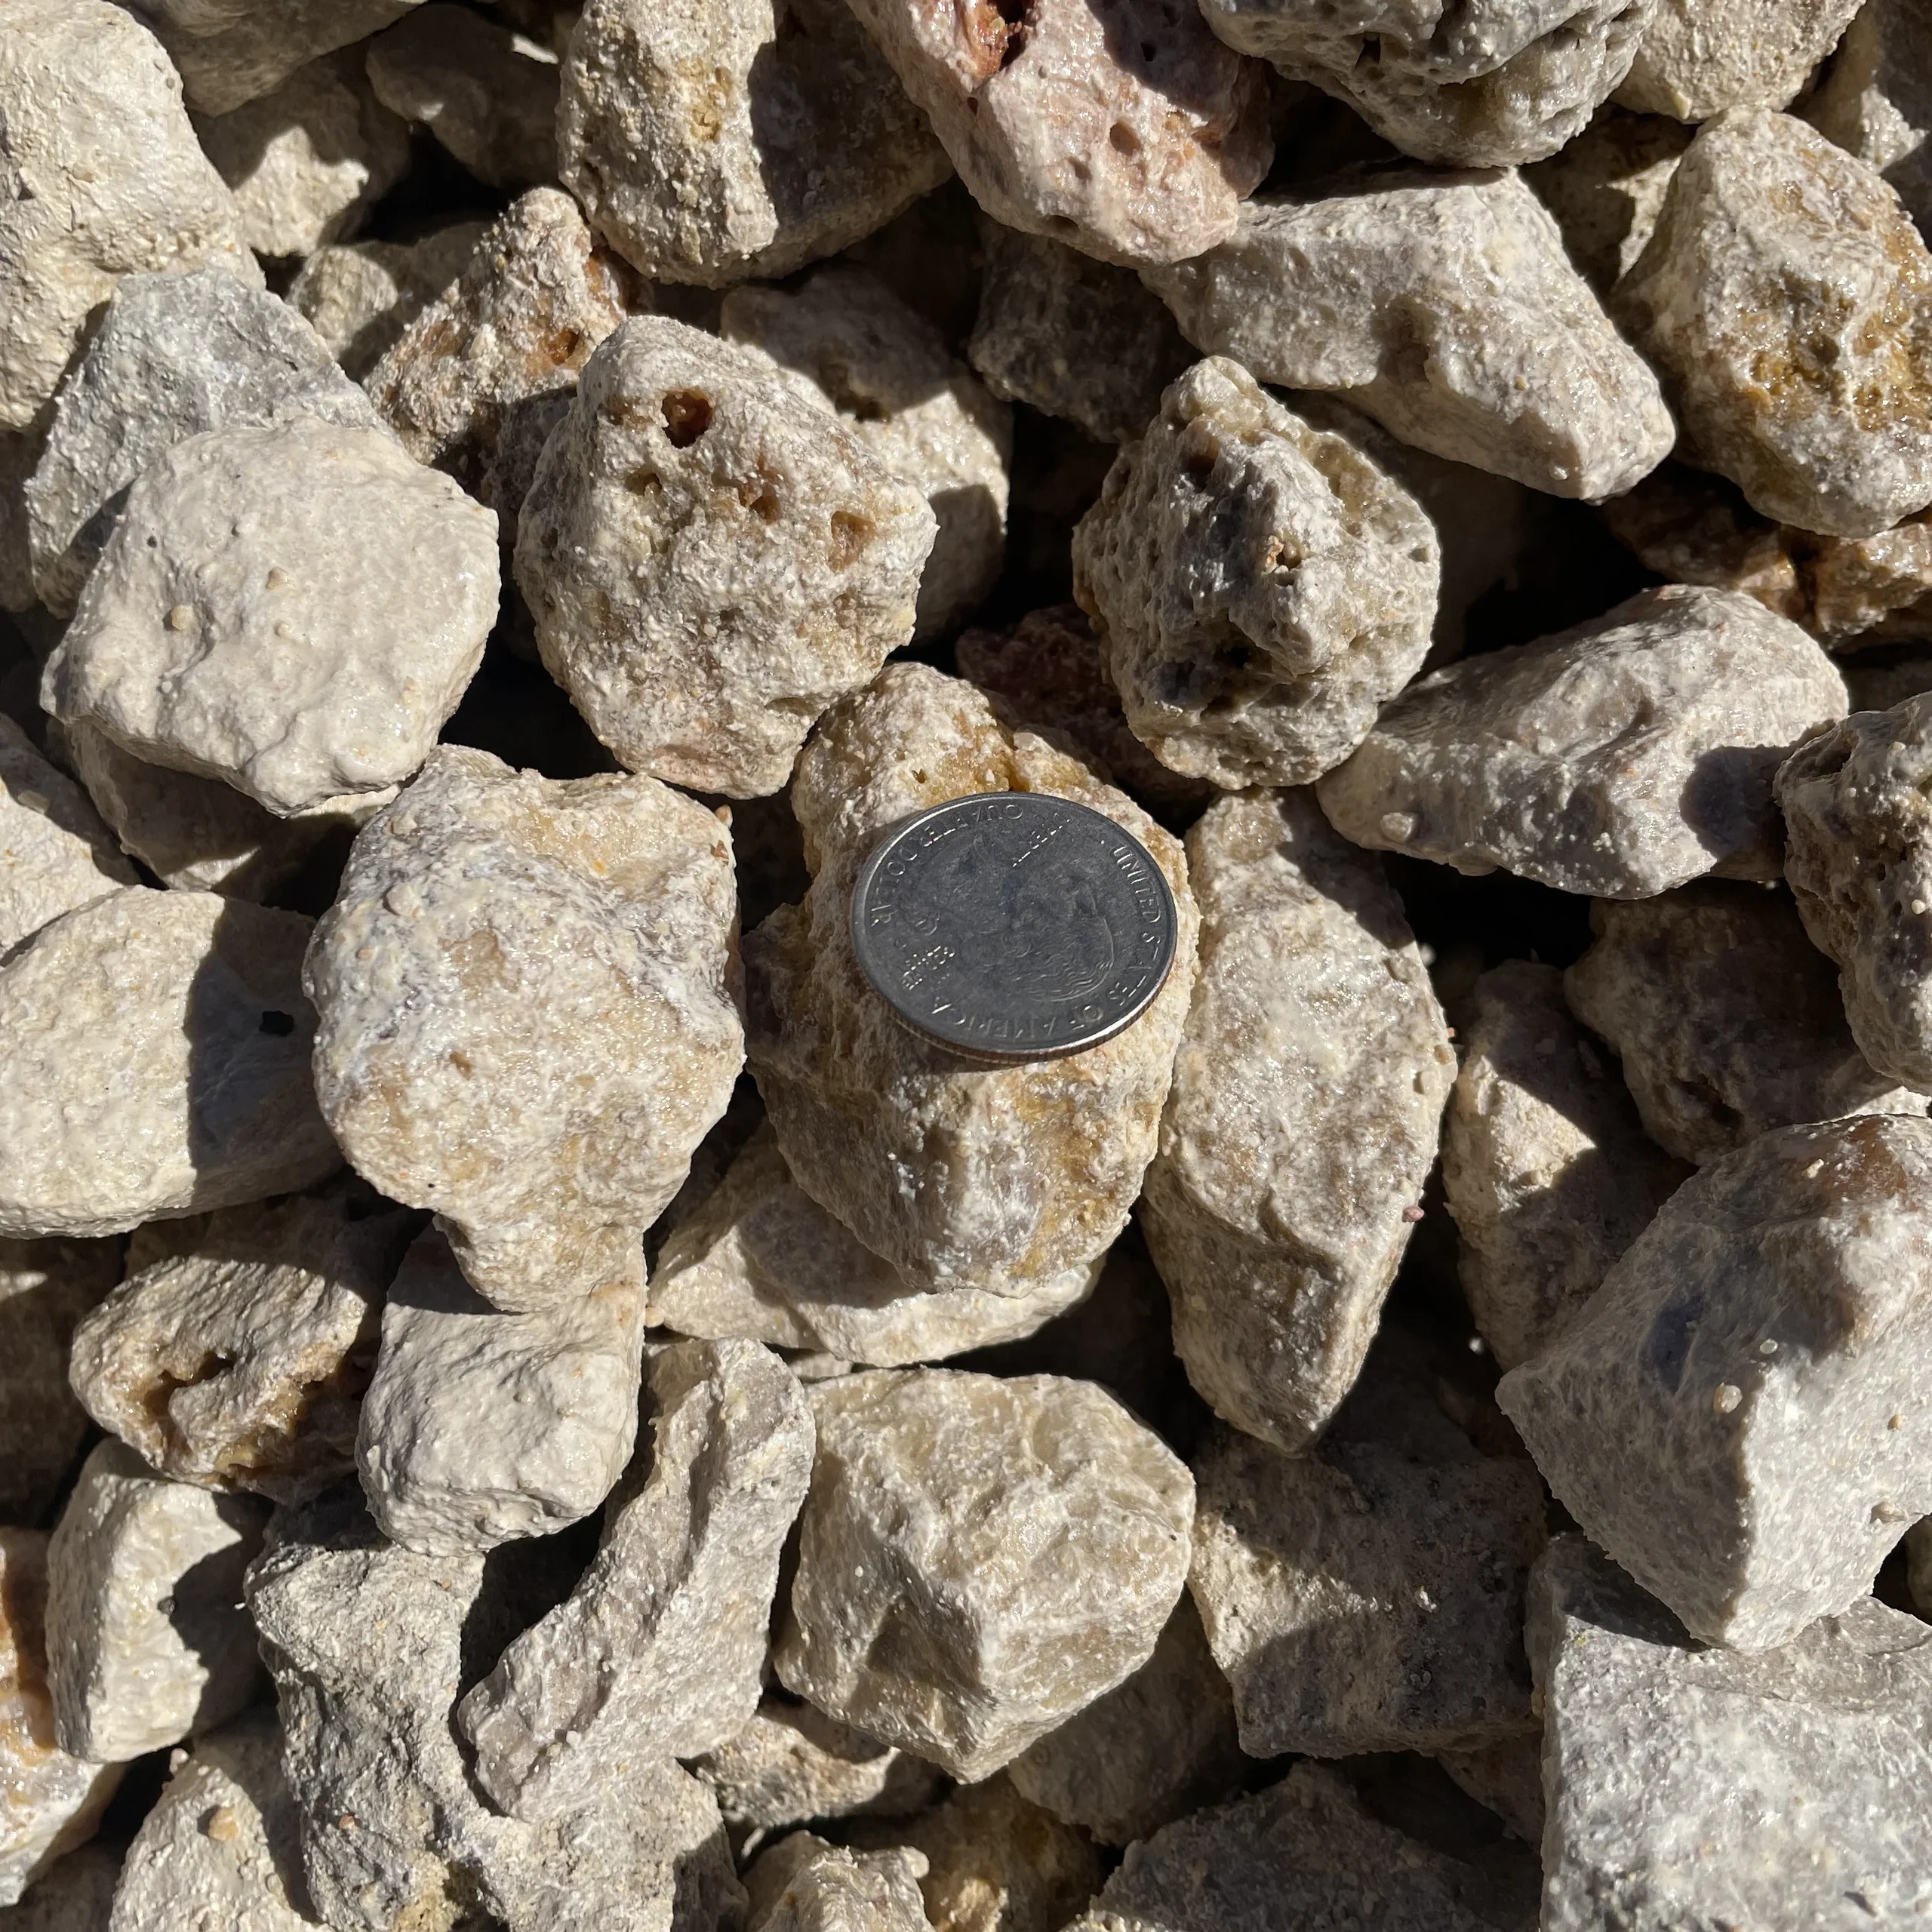 1.5" Limestone Gravel for Sale and Delivery for Texas